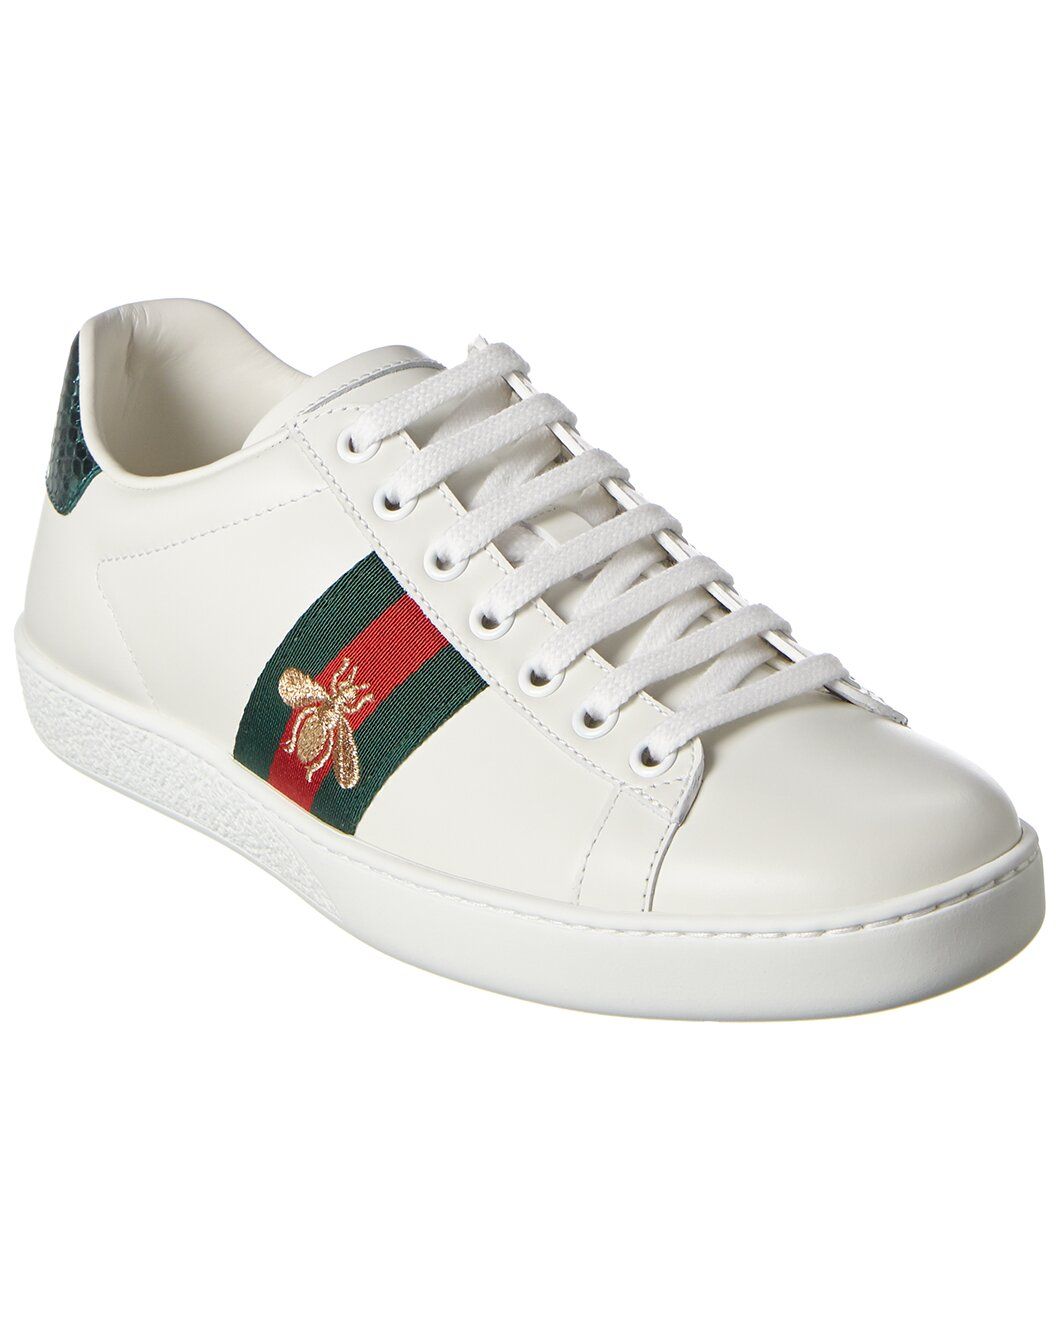 Ace Embroidered Leather Sneaker | Gilt & Gilt City